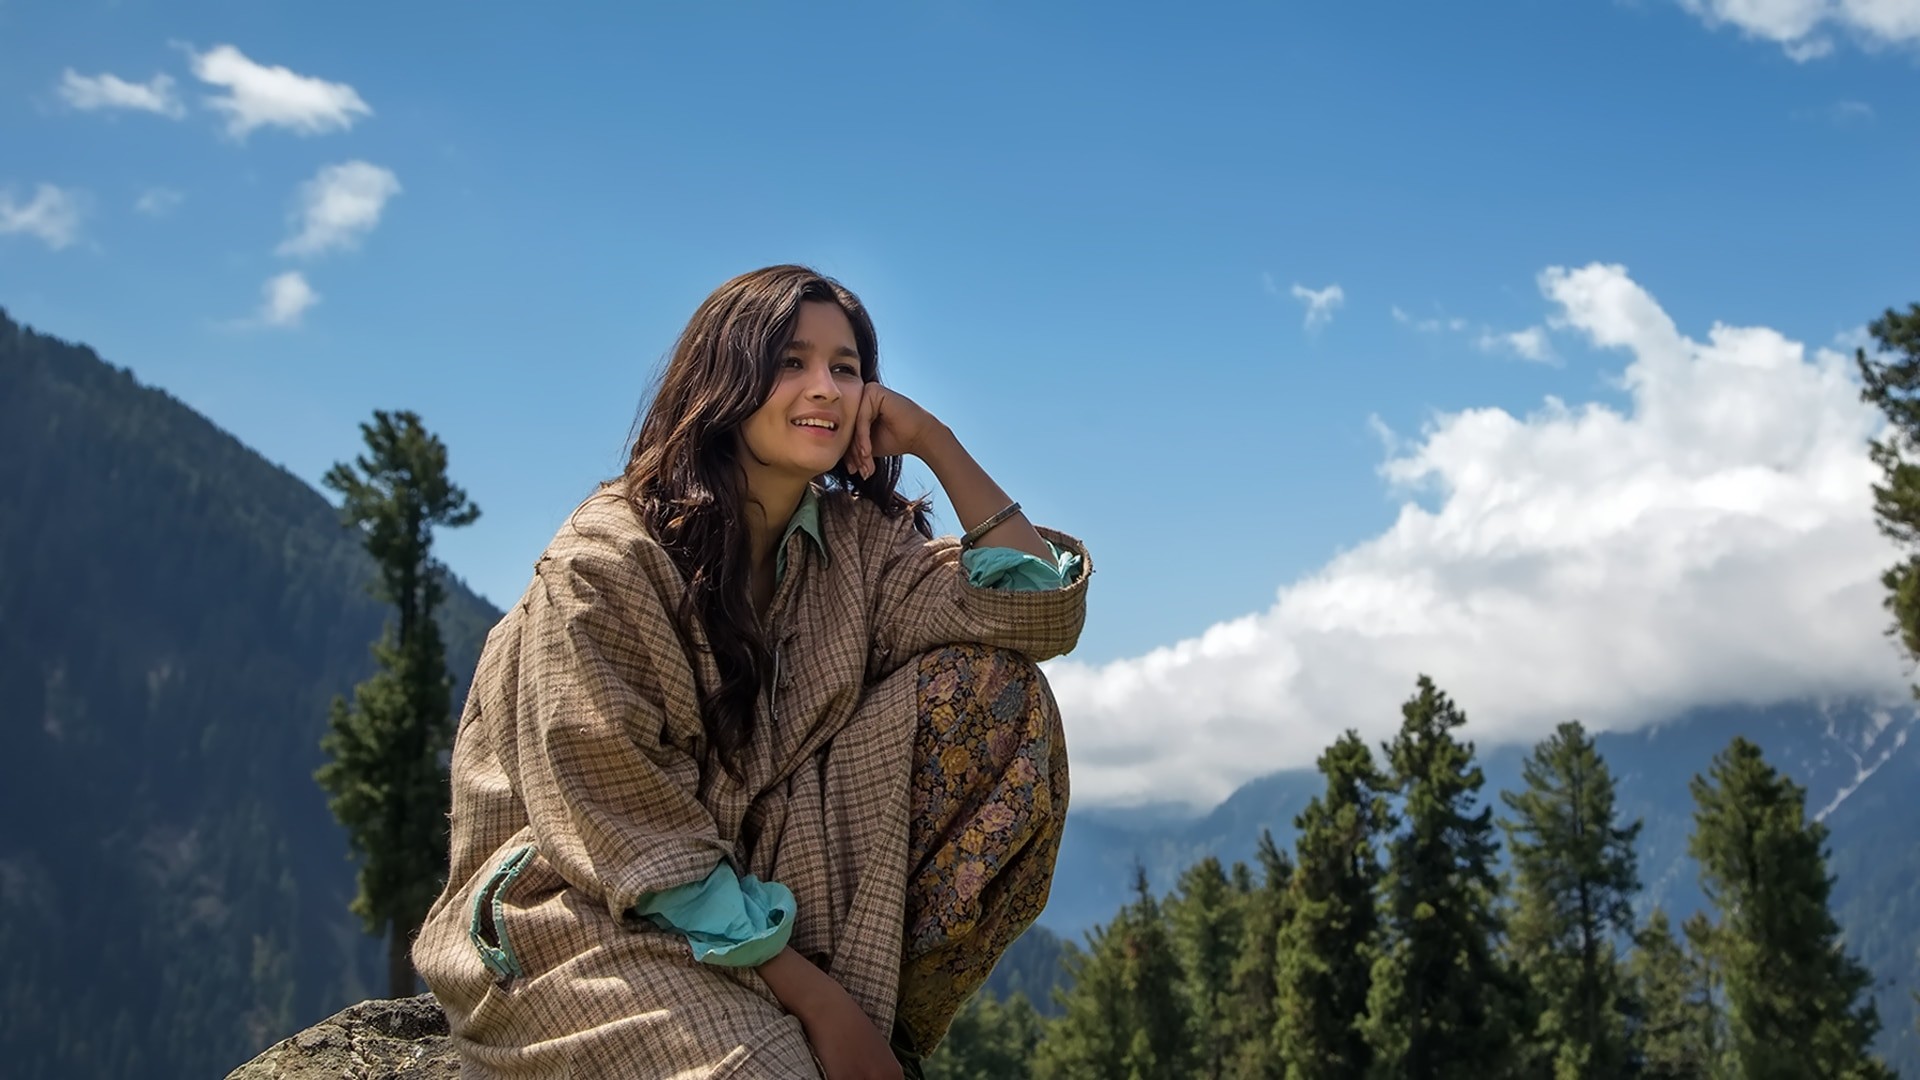 1920x1080 ... and the people living there Jammu And Kashmir stock photos 217, 2018  Jammu and Kashmir LATEST NEW IMAGES beautiful mountent hd photos free  download